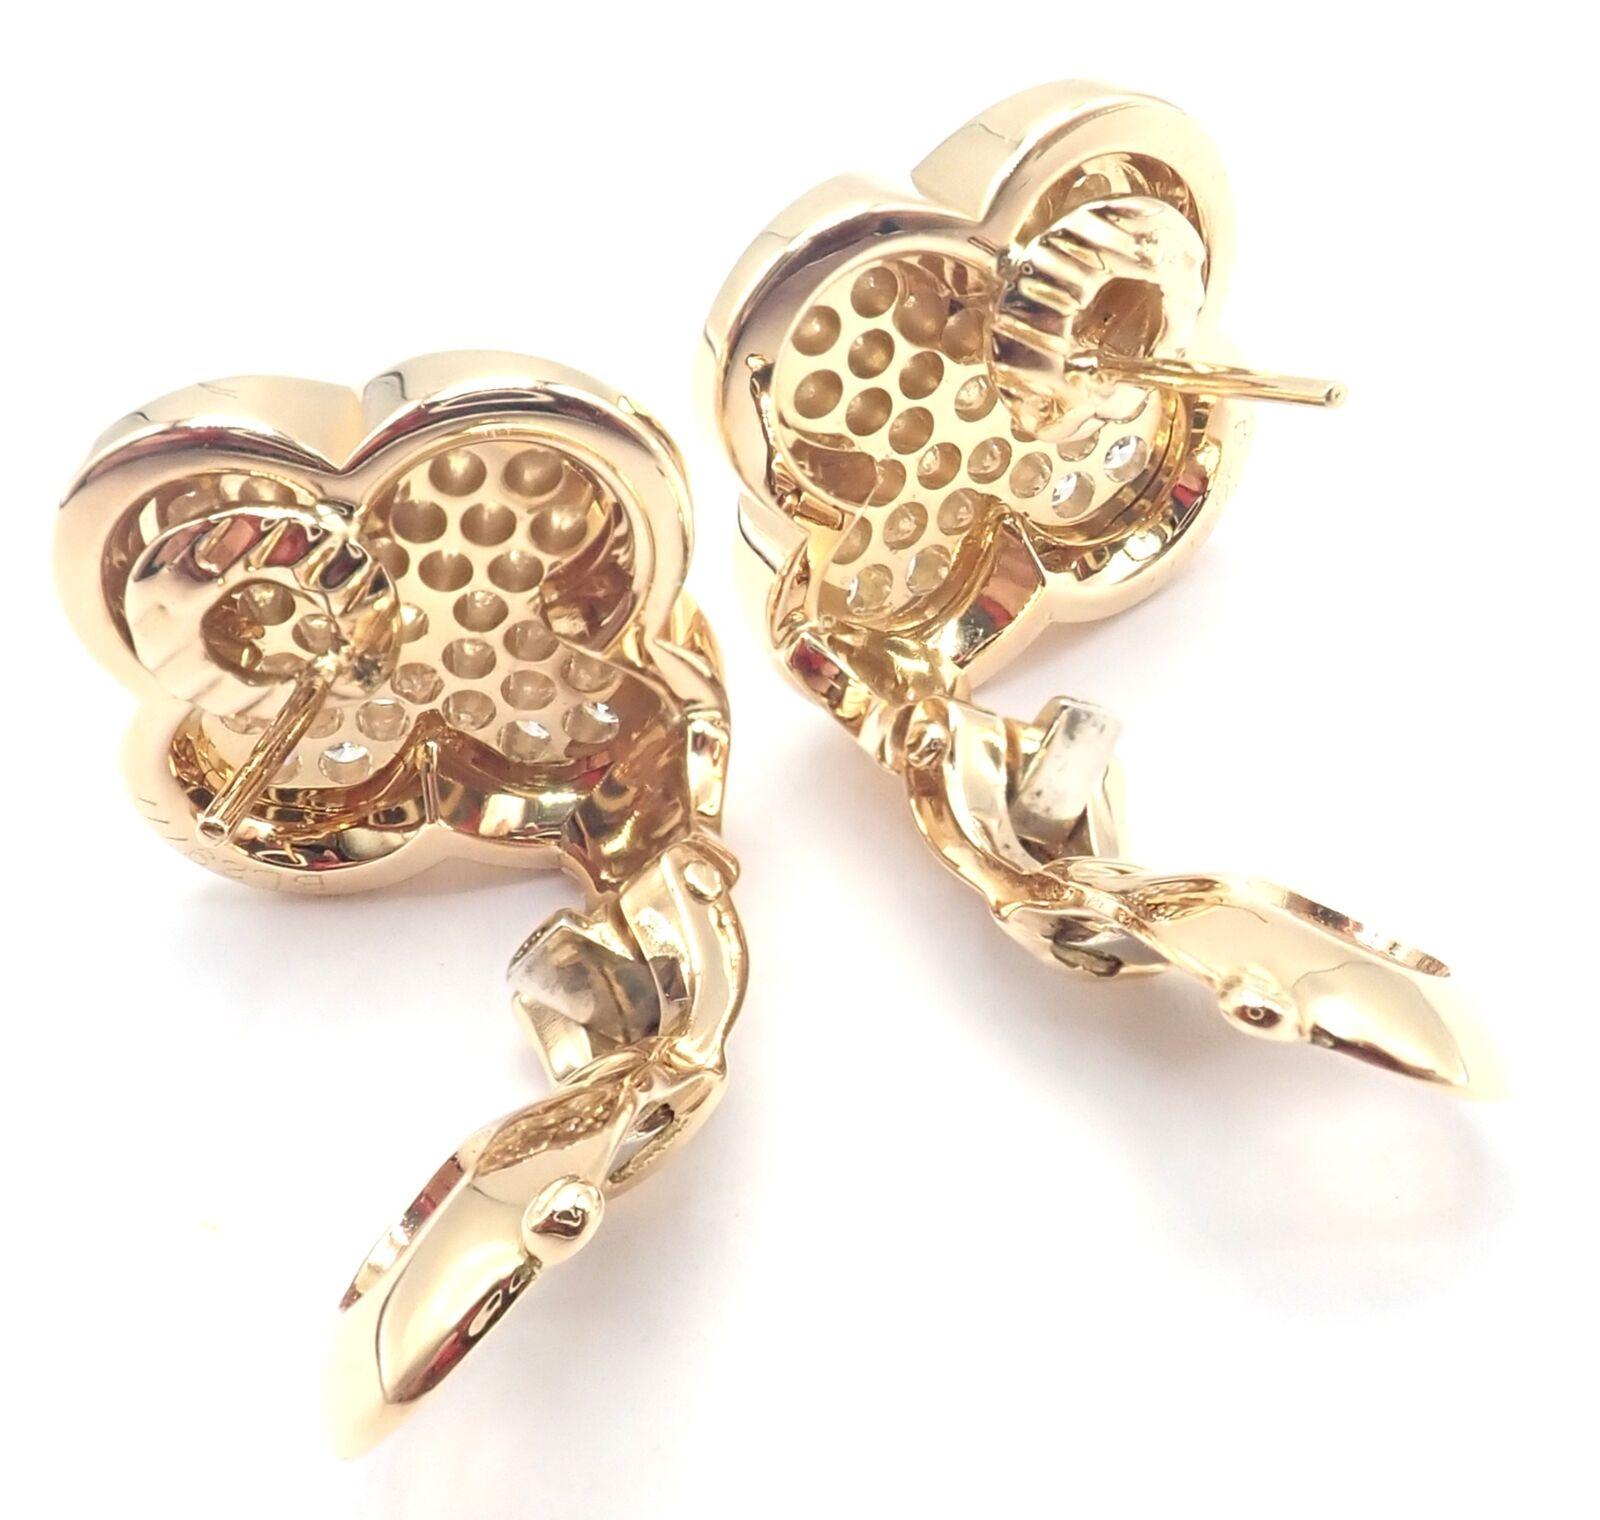 Van Cleef & Arpels Diamond Pure Alhambra Yellow Gold Earrings In Excellent Condition For Sale In Holland, PA